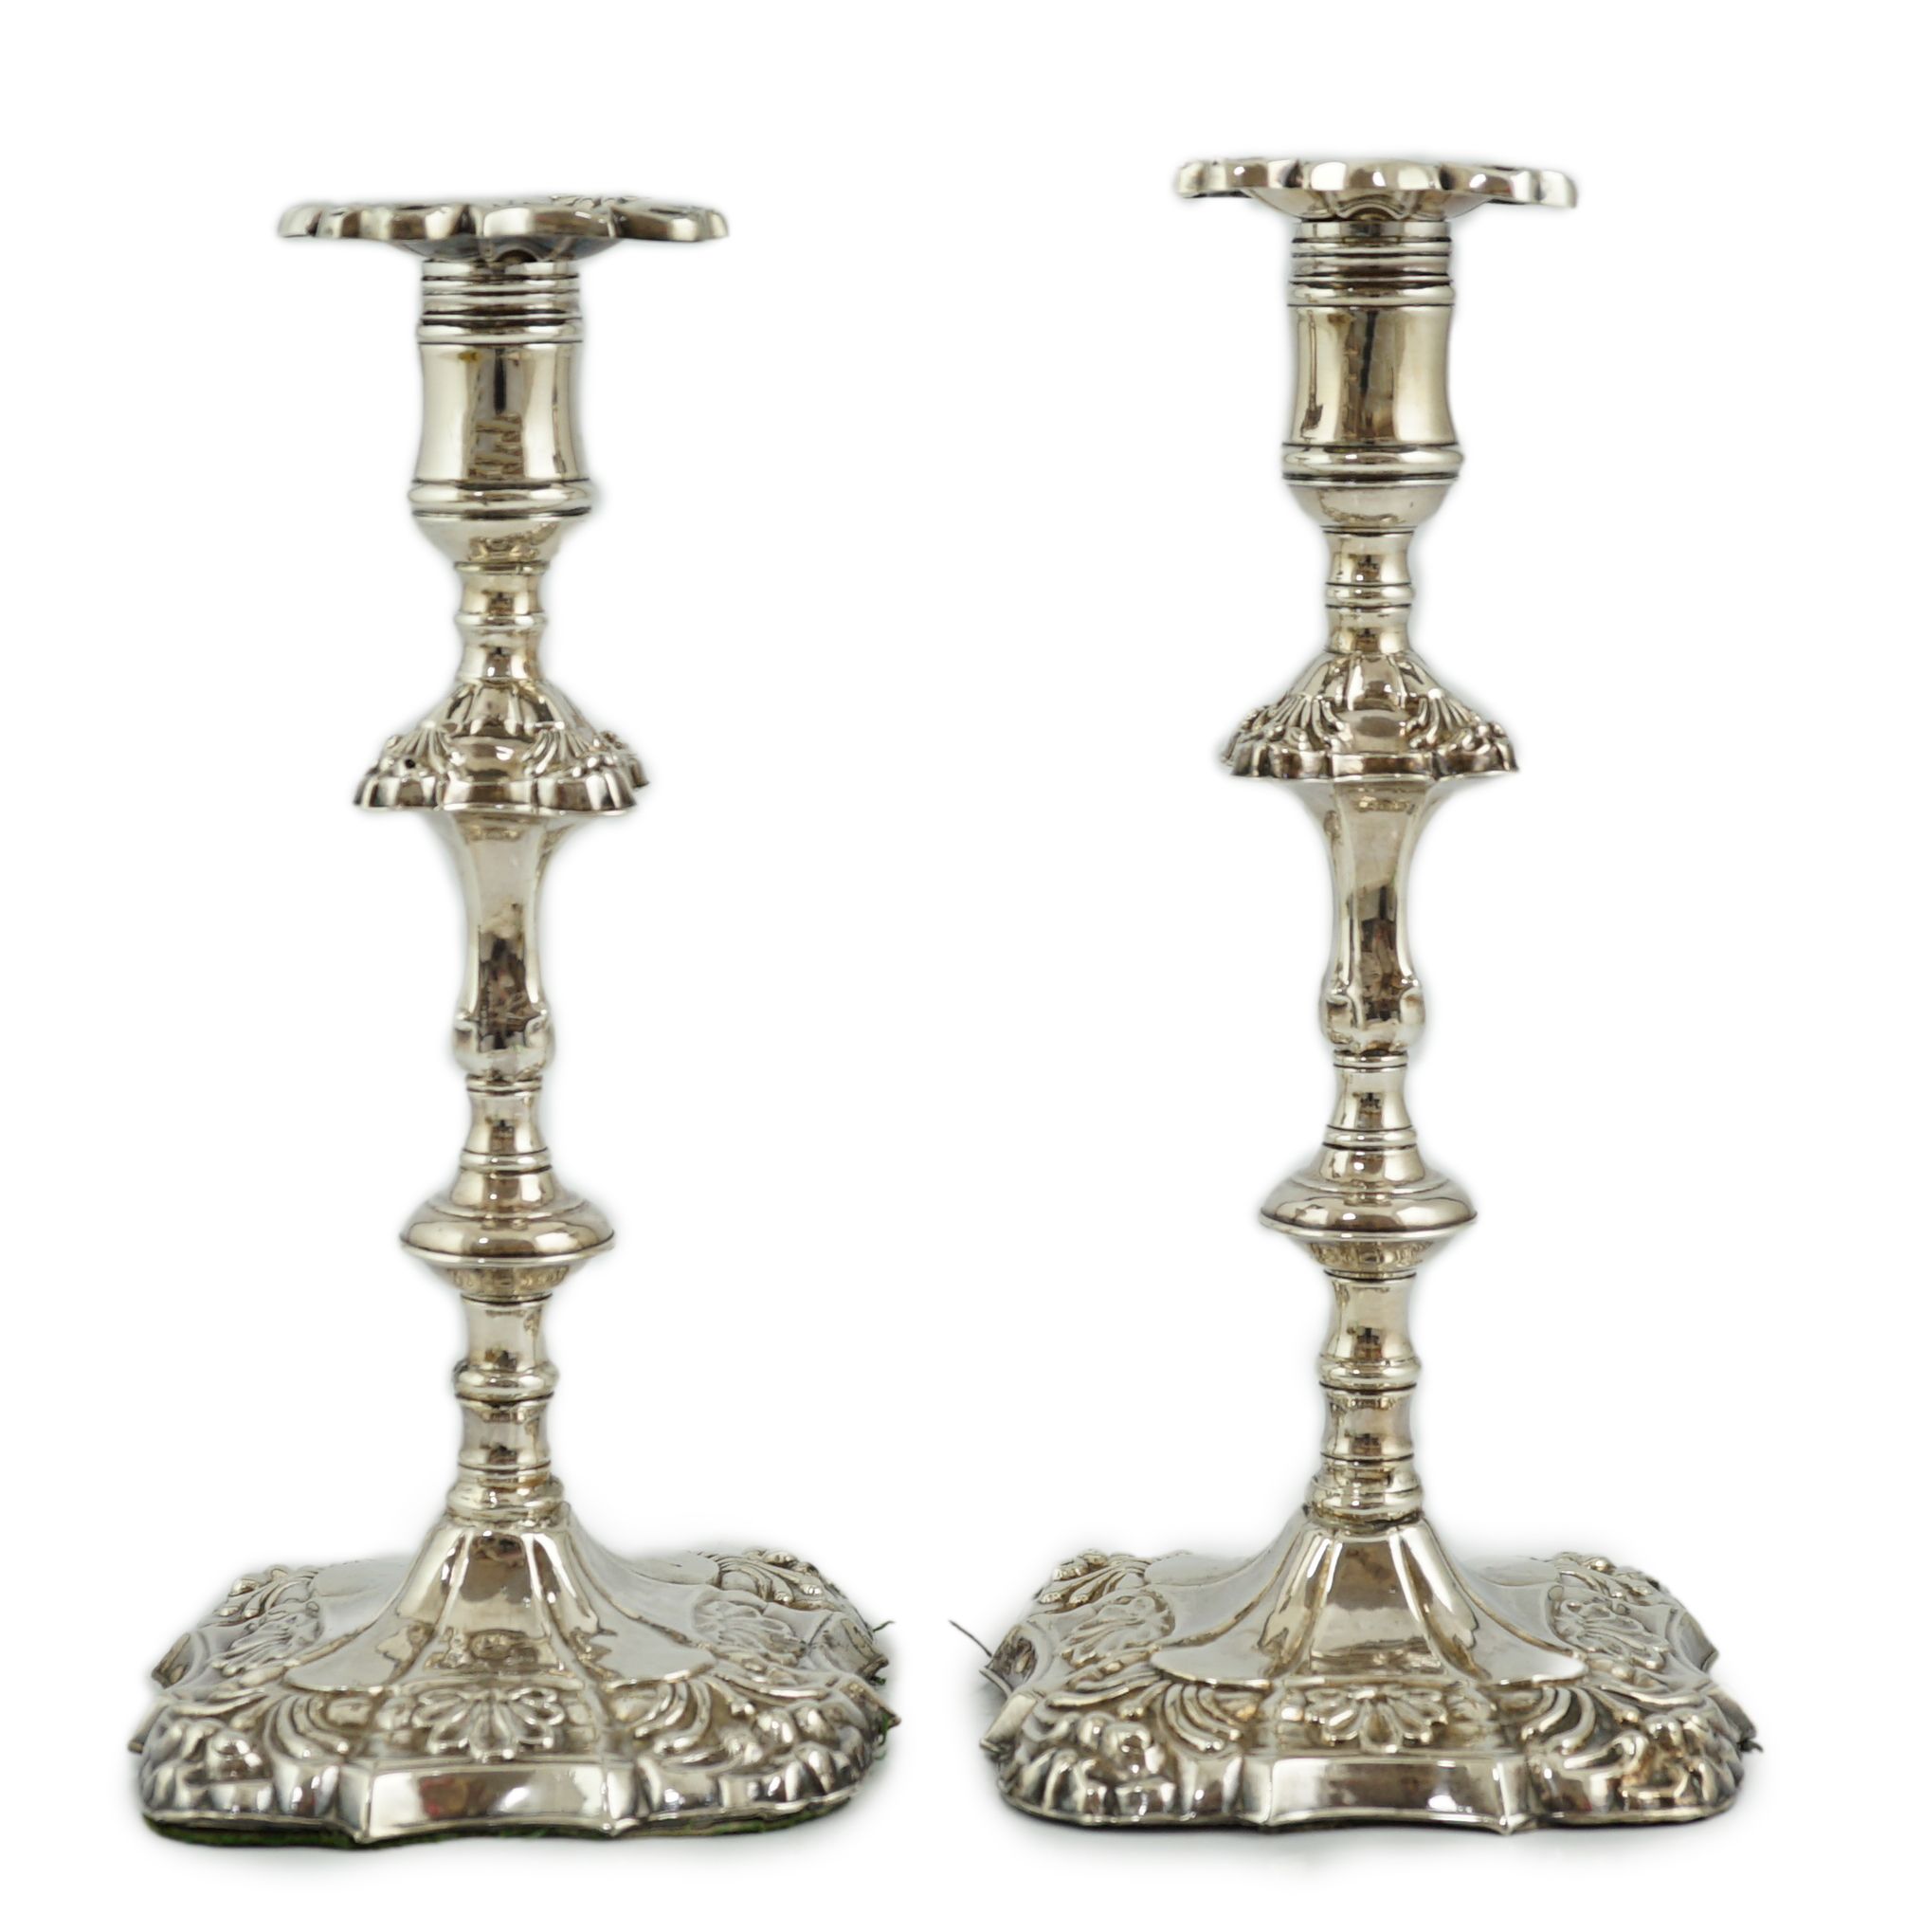 A pair of early George III silver candlesticks, by James Stamp & John Baker